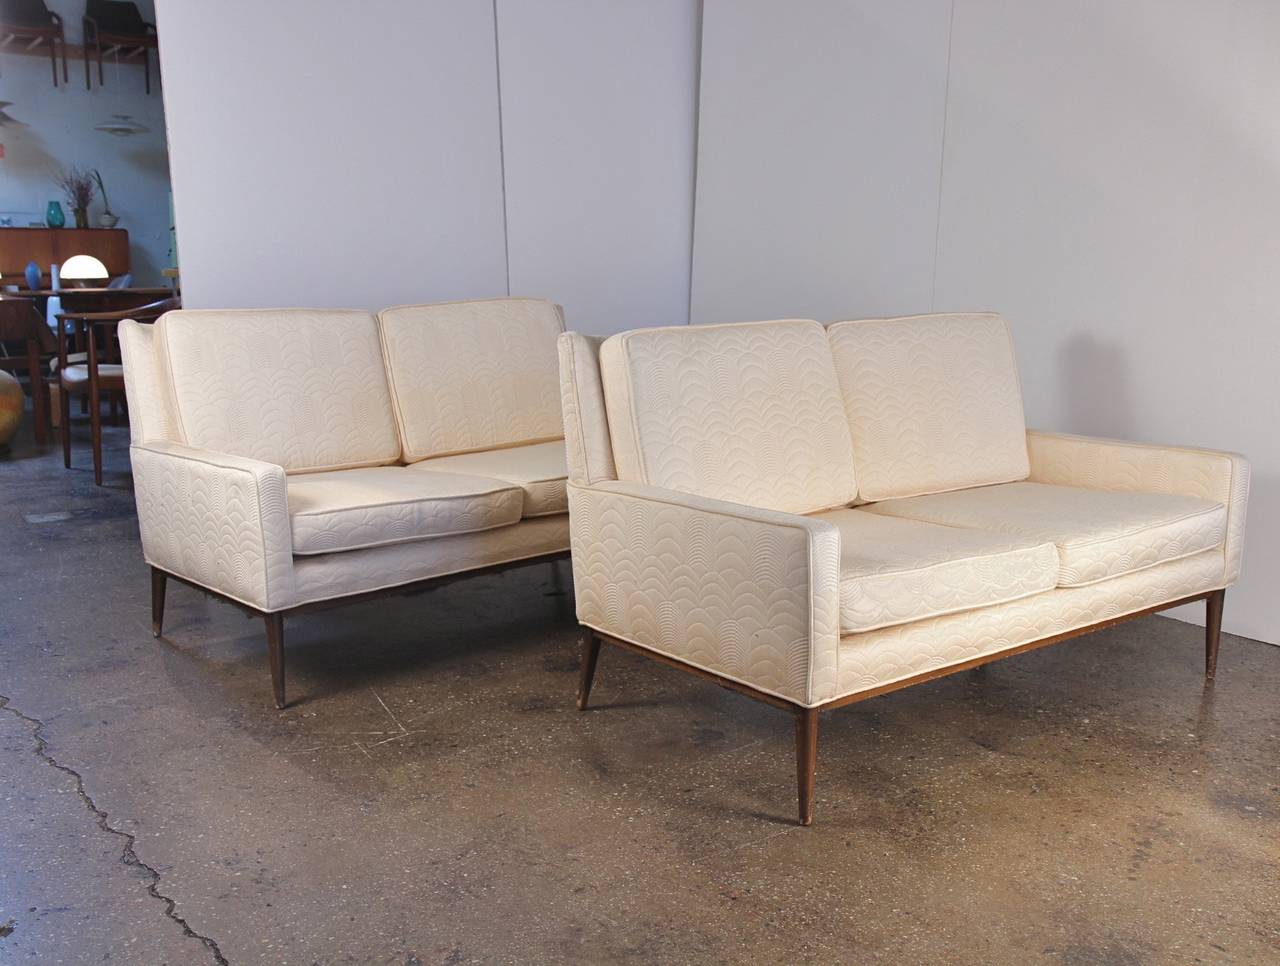 ONLY ONE LEFT. We have two of these lovely mid-century small sofas designed by Paul McCobb. These matching love seats are covered in the original amazing quilted cream fabric, which has wear. Use as-is or ask us for an upholstery quote. Sturdy and